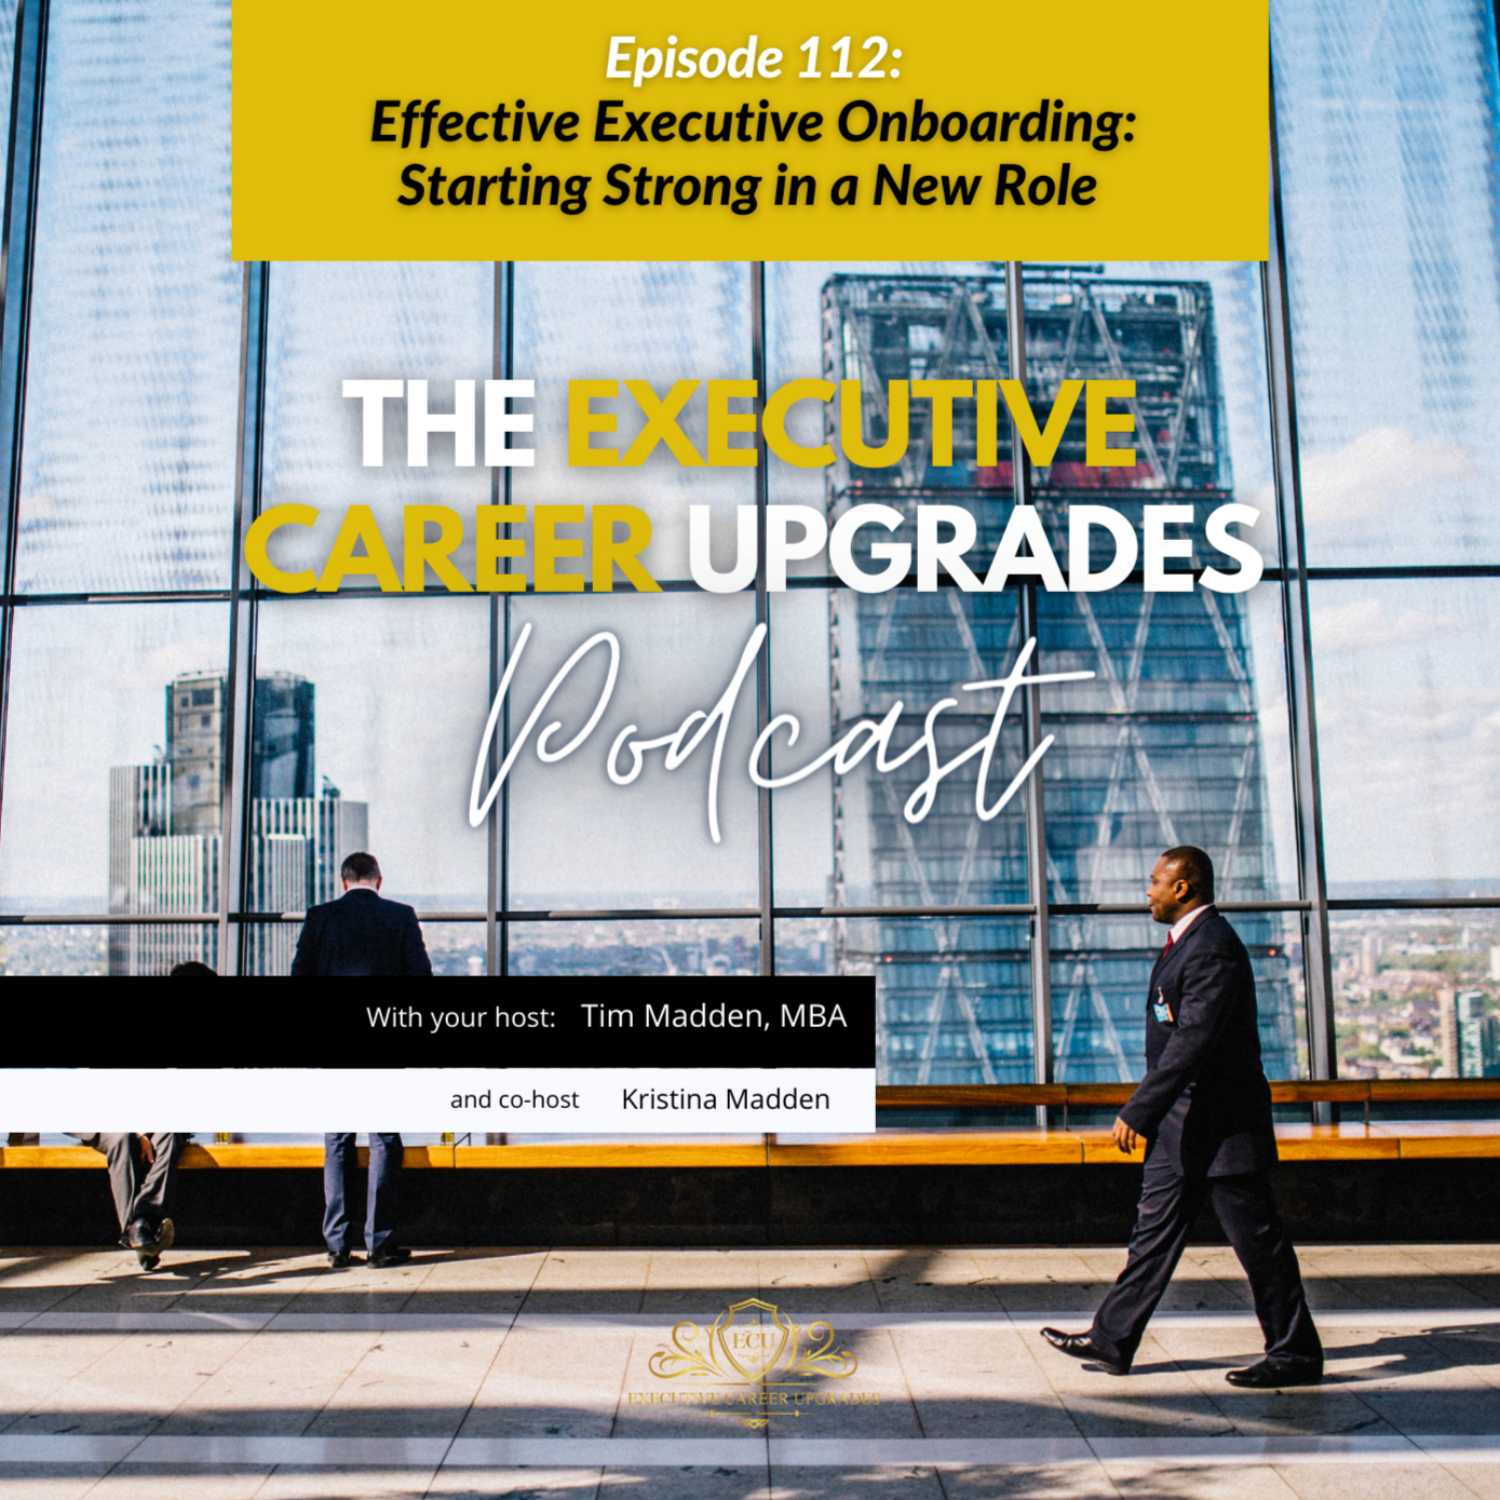 Effective Executive Onboarding: Starting Strong in a New Role